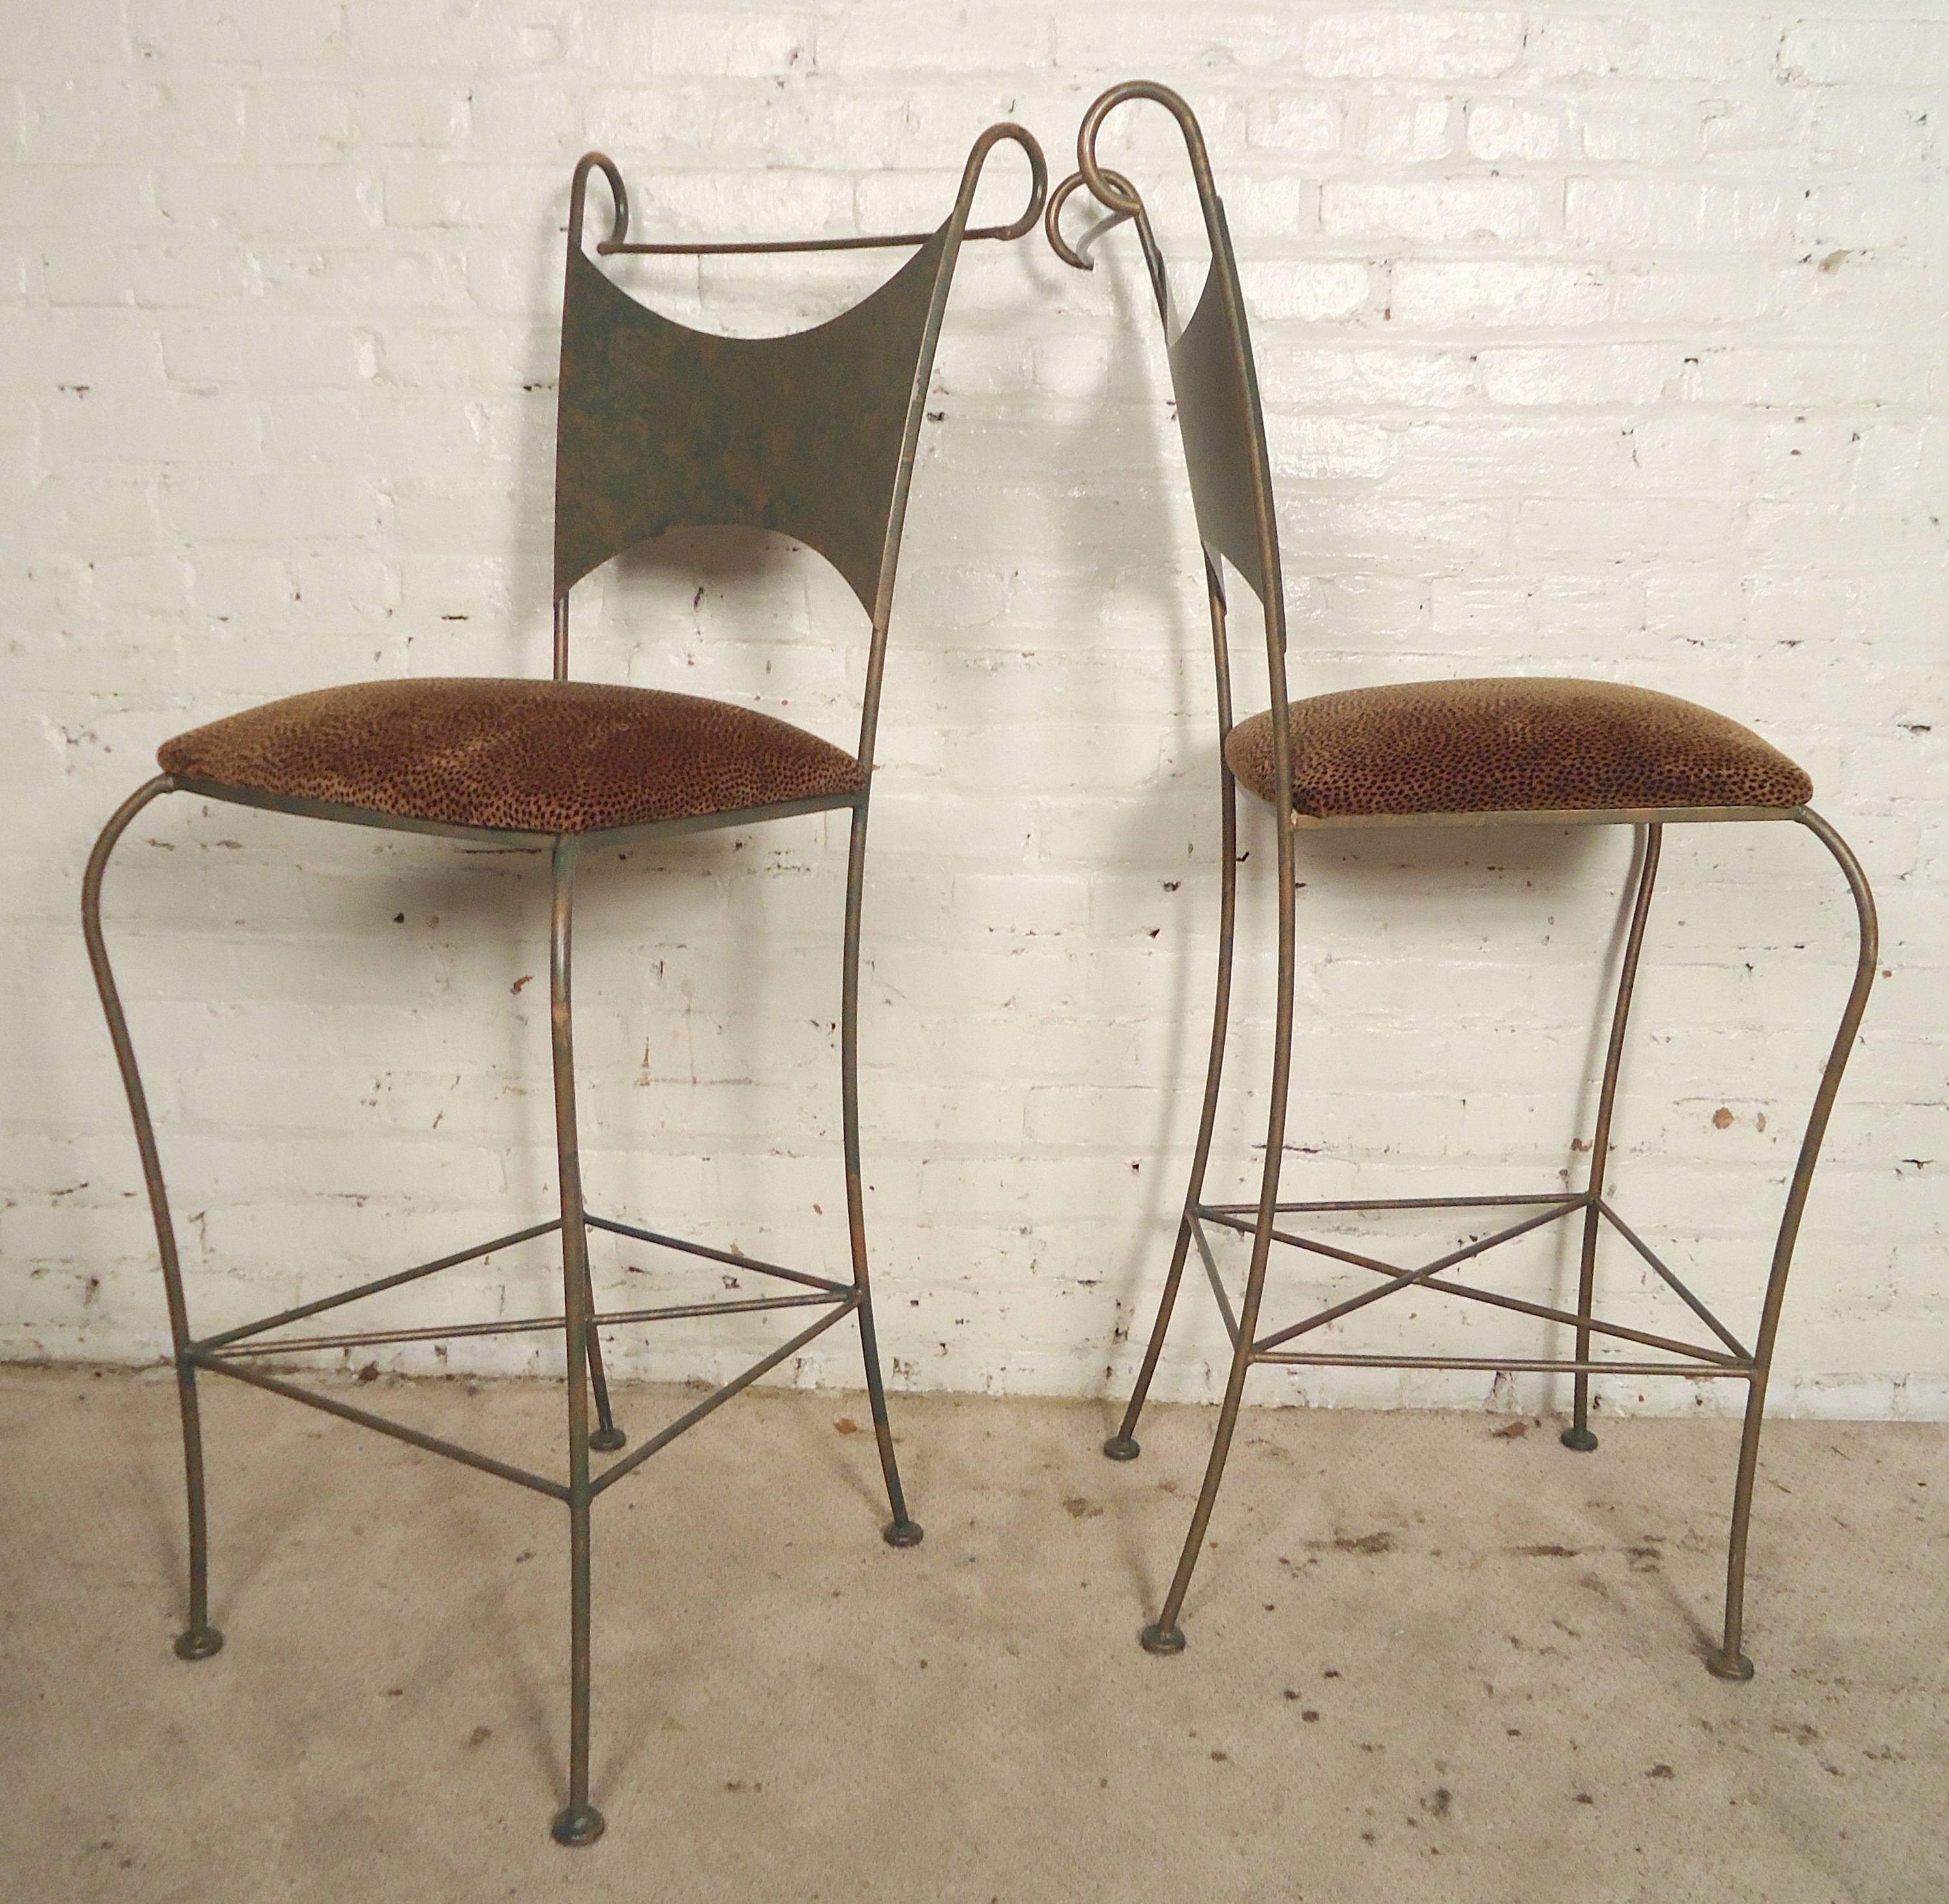 Set of wild iron stools with leopard print seats. Bent iron frames with scrolled backs and square footrests. They add great style and texture to your bar.

(Please confirm item location - NY or NJ - with dealer)
